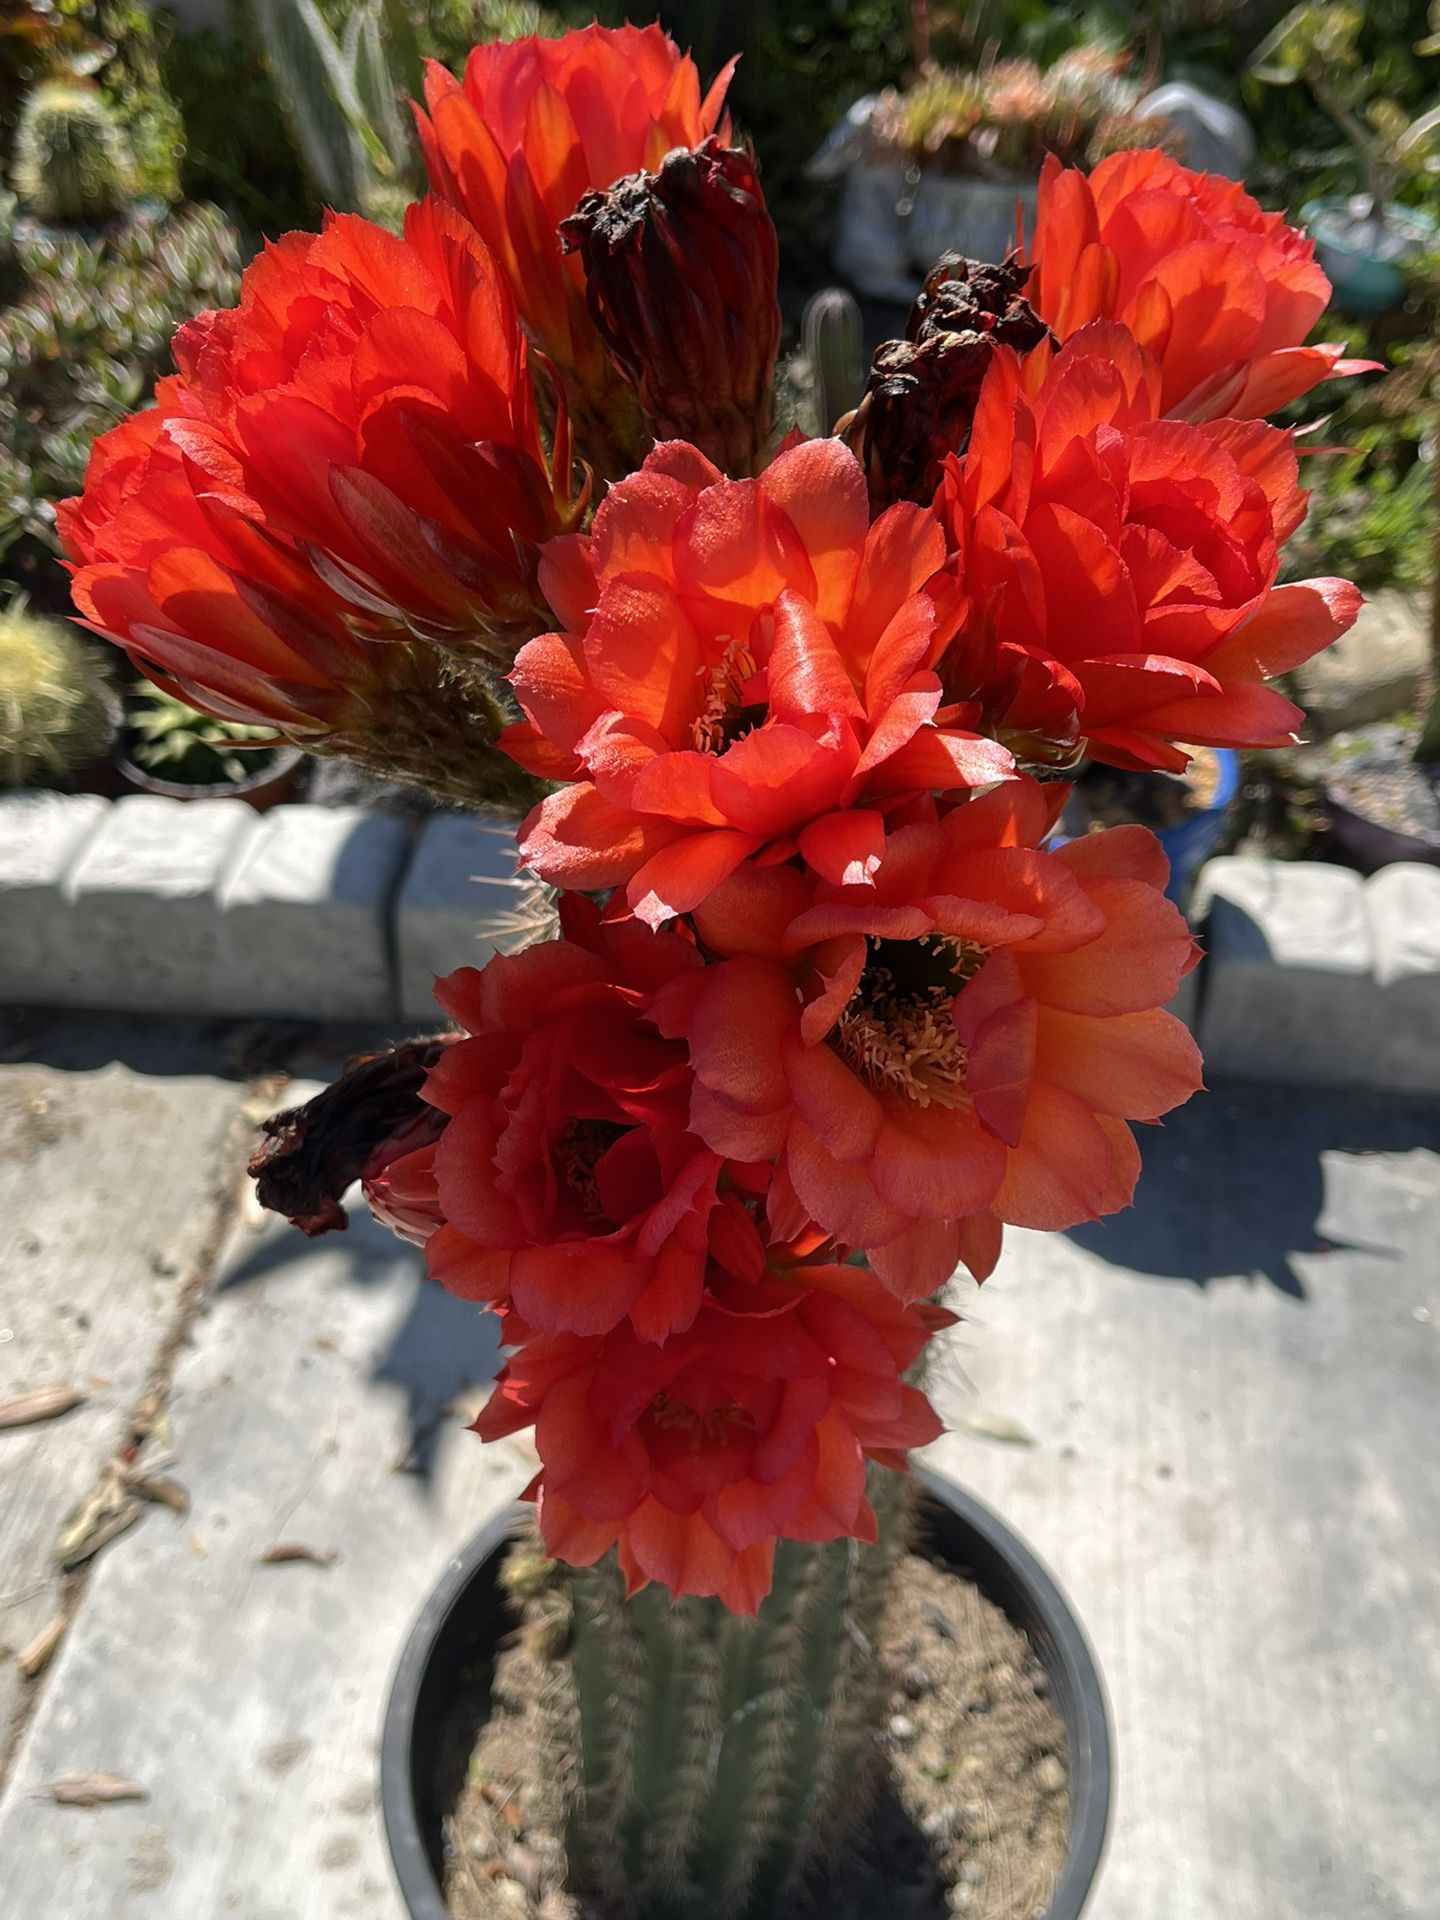 Very Healthy Cactus With Beautiful Flowers 